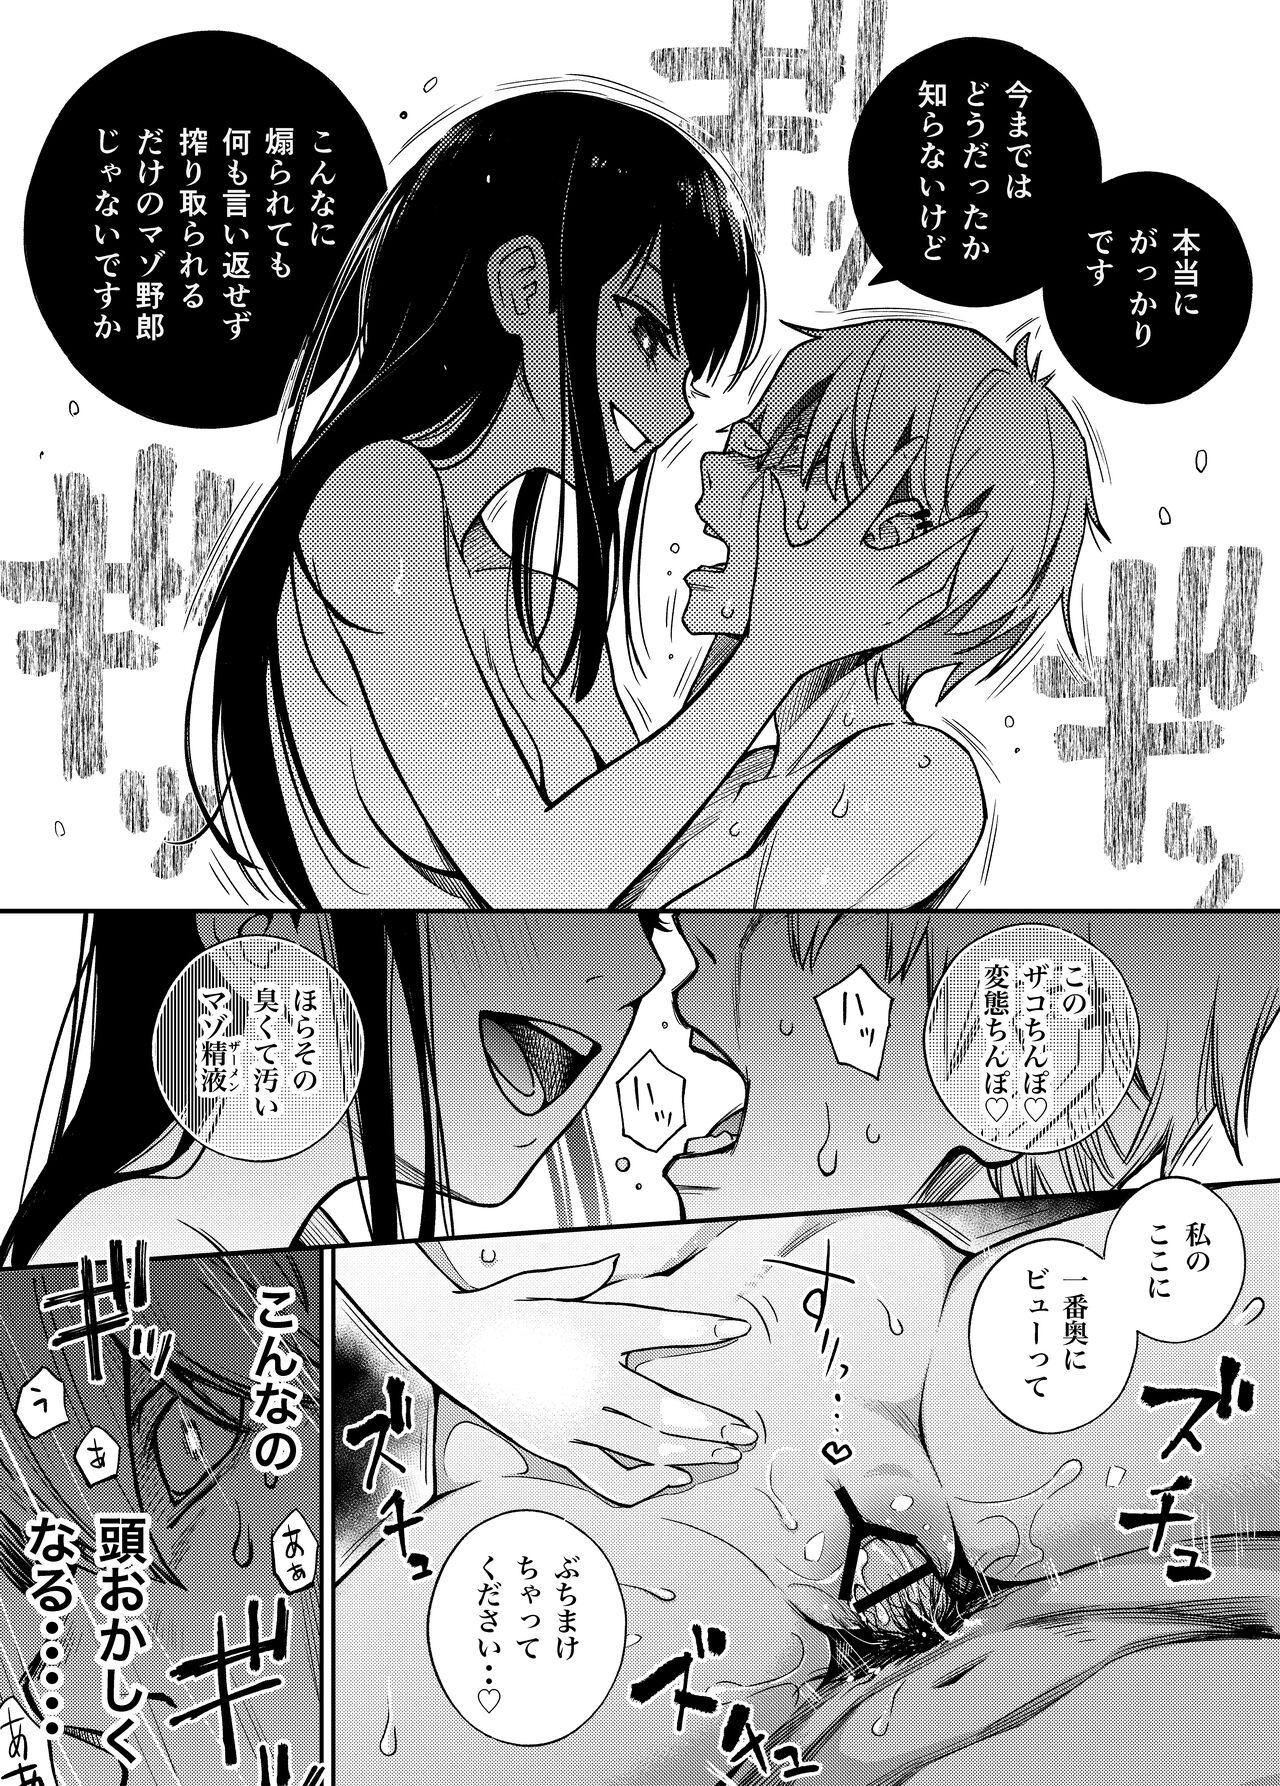 Gay Physicals 委員長は堕とせない～ツイッターまんが総集編2019-2021～ - Original Argenta - Page 7